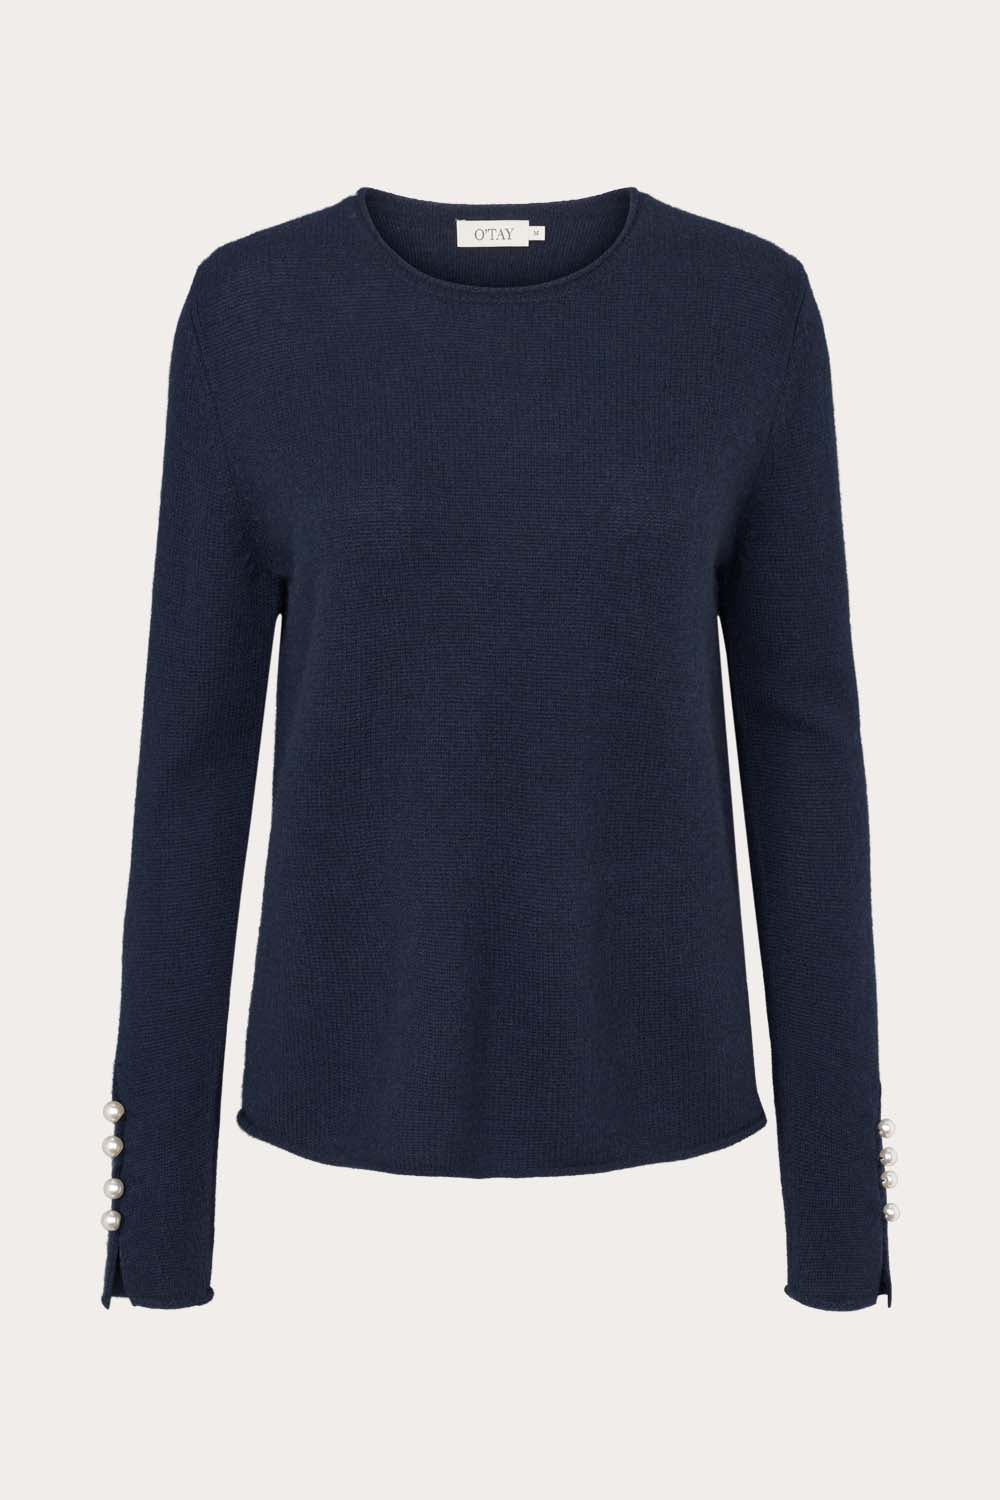 O'TAY Abbelone Sweater Bluser Navy